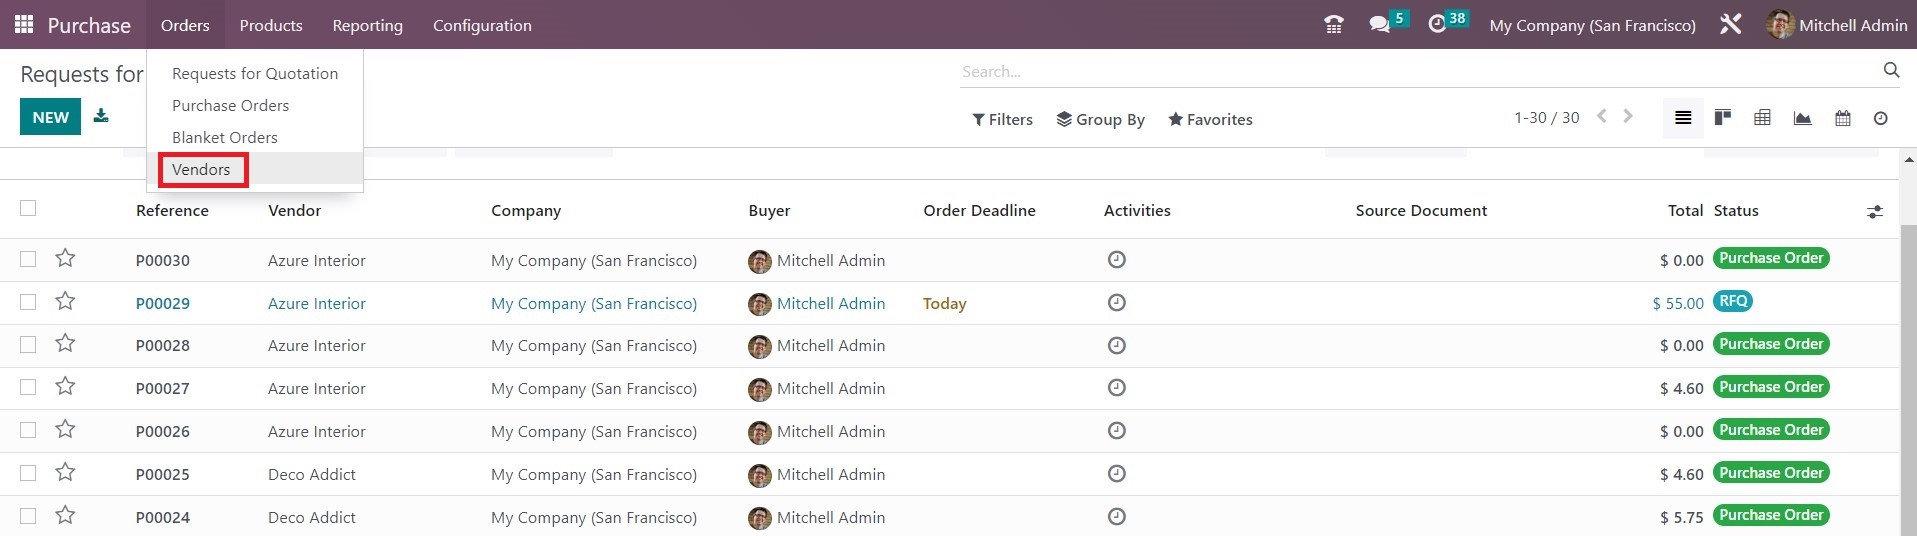 Setting Up Vendor Records and Pricelists in Odoo - Midis - 1